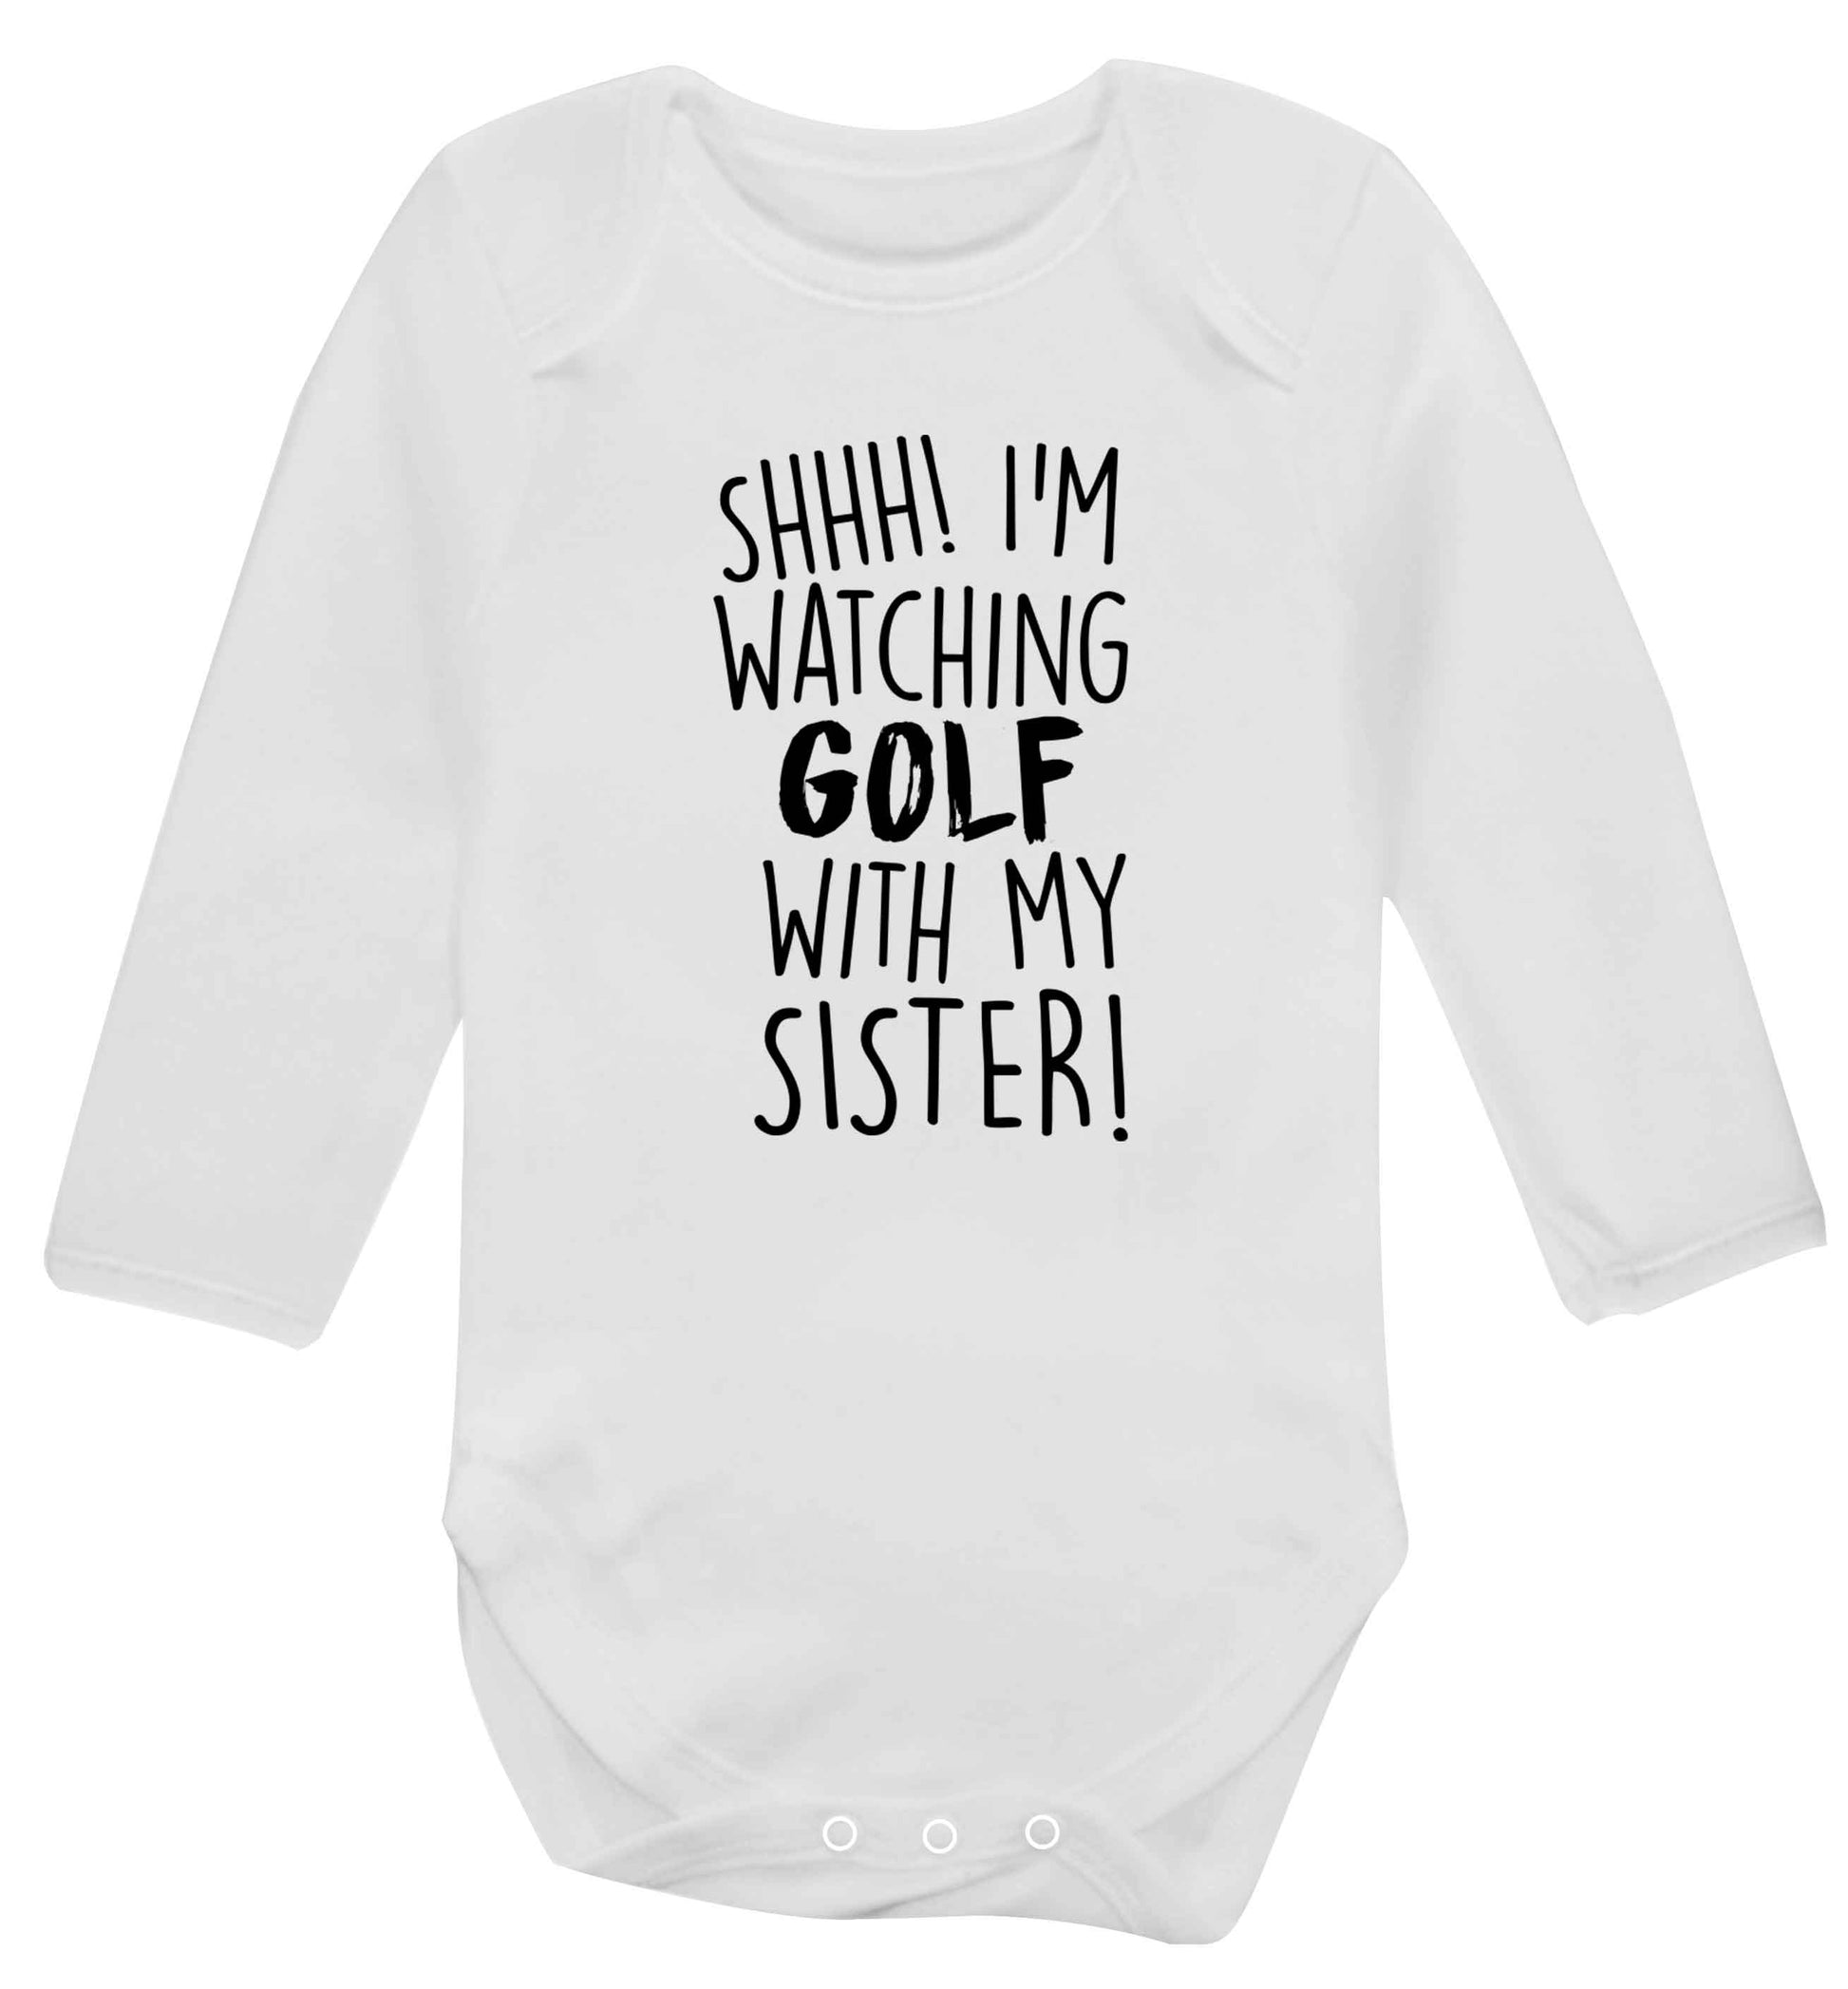 Shh I'm watching golf with my sister Baby Vest long sleeved white 6-12 months